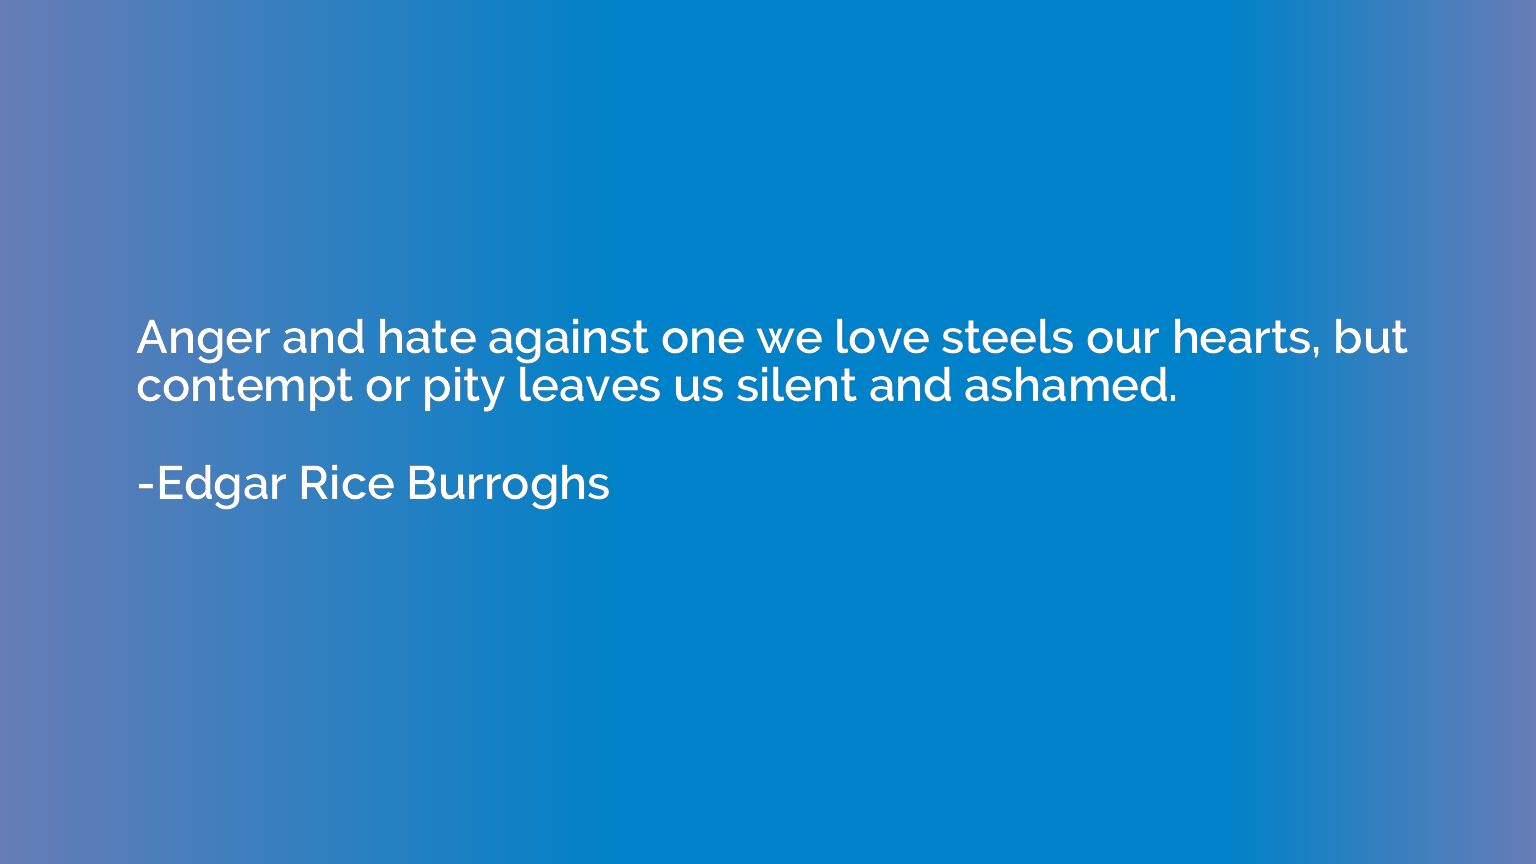 Anger and hate against one we love steels our hearts, but co